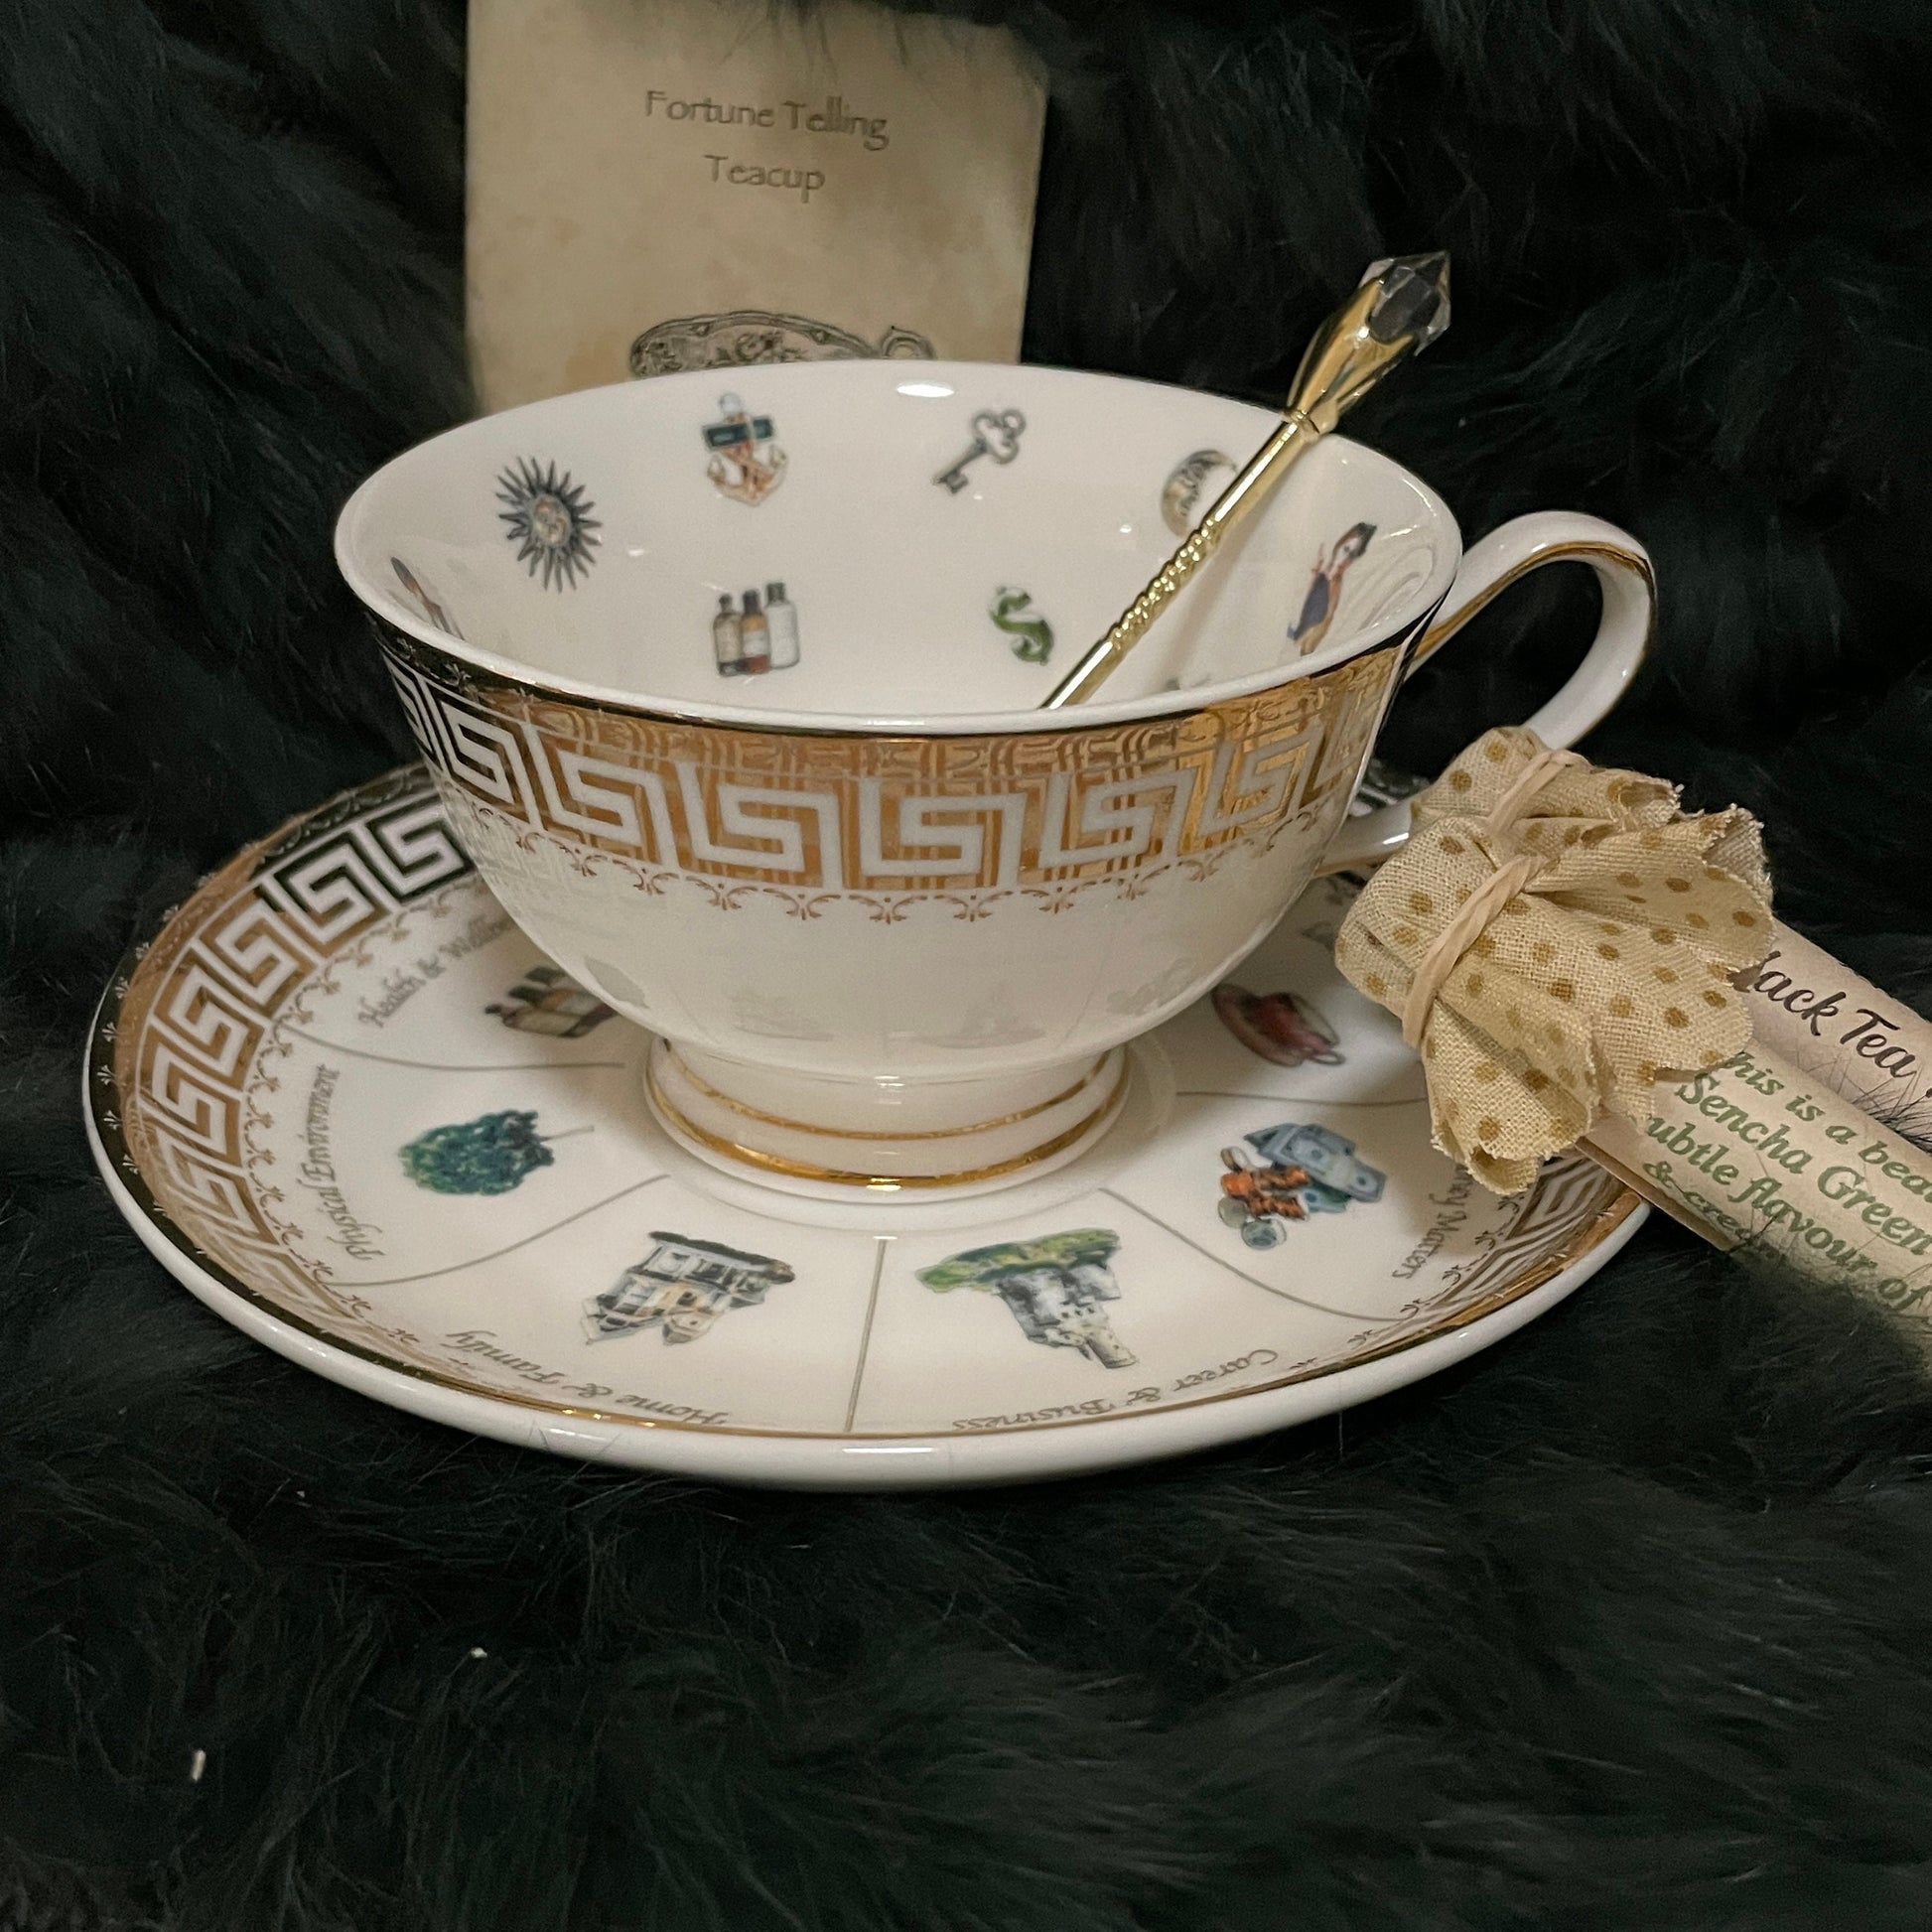 White Gold Tea cup and saucer set gift fortune telling teacup tarot tea party divination gift for female birthday mom witch Bridal party